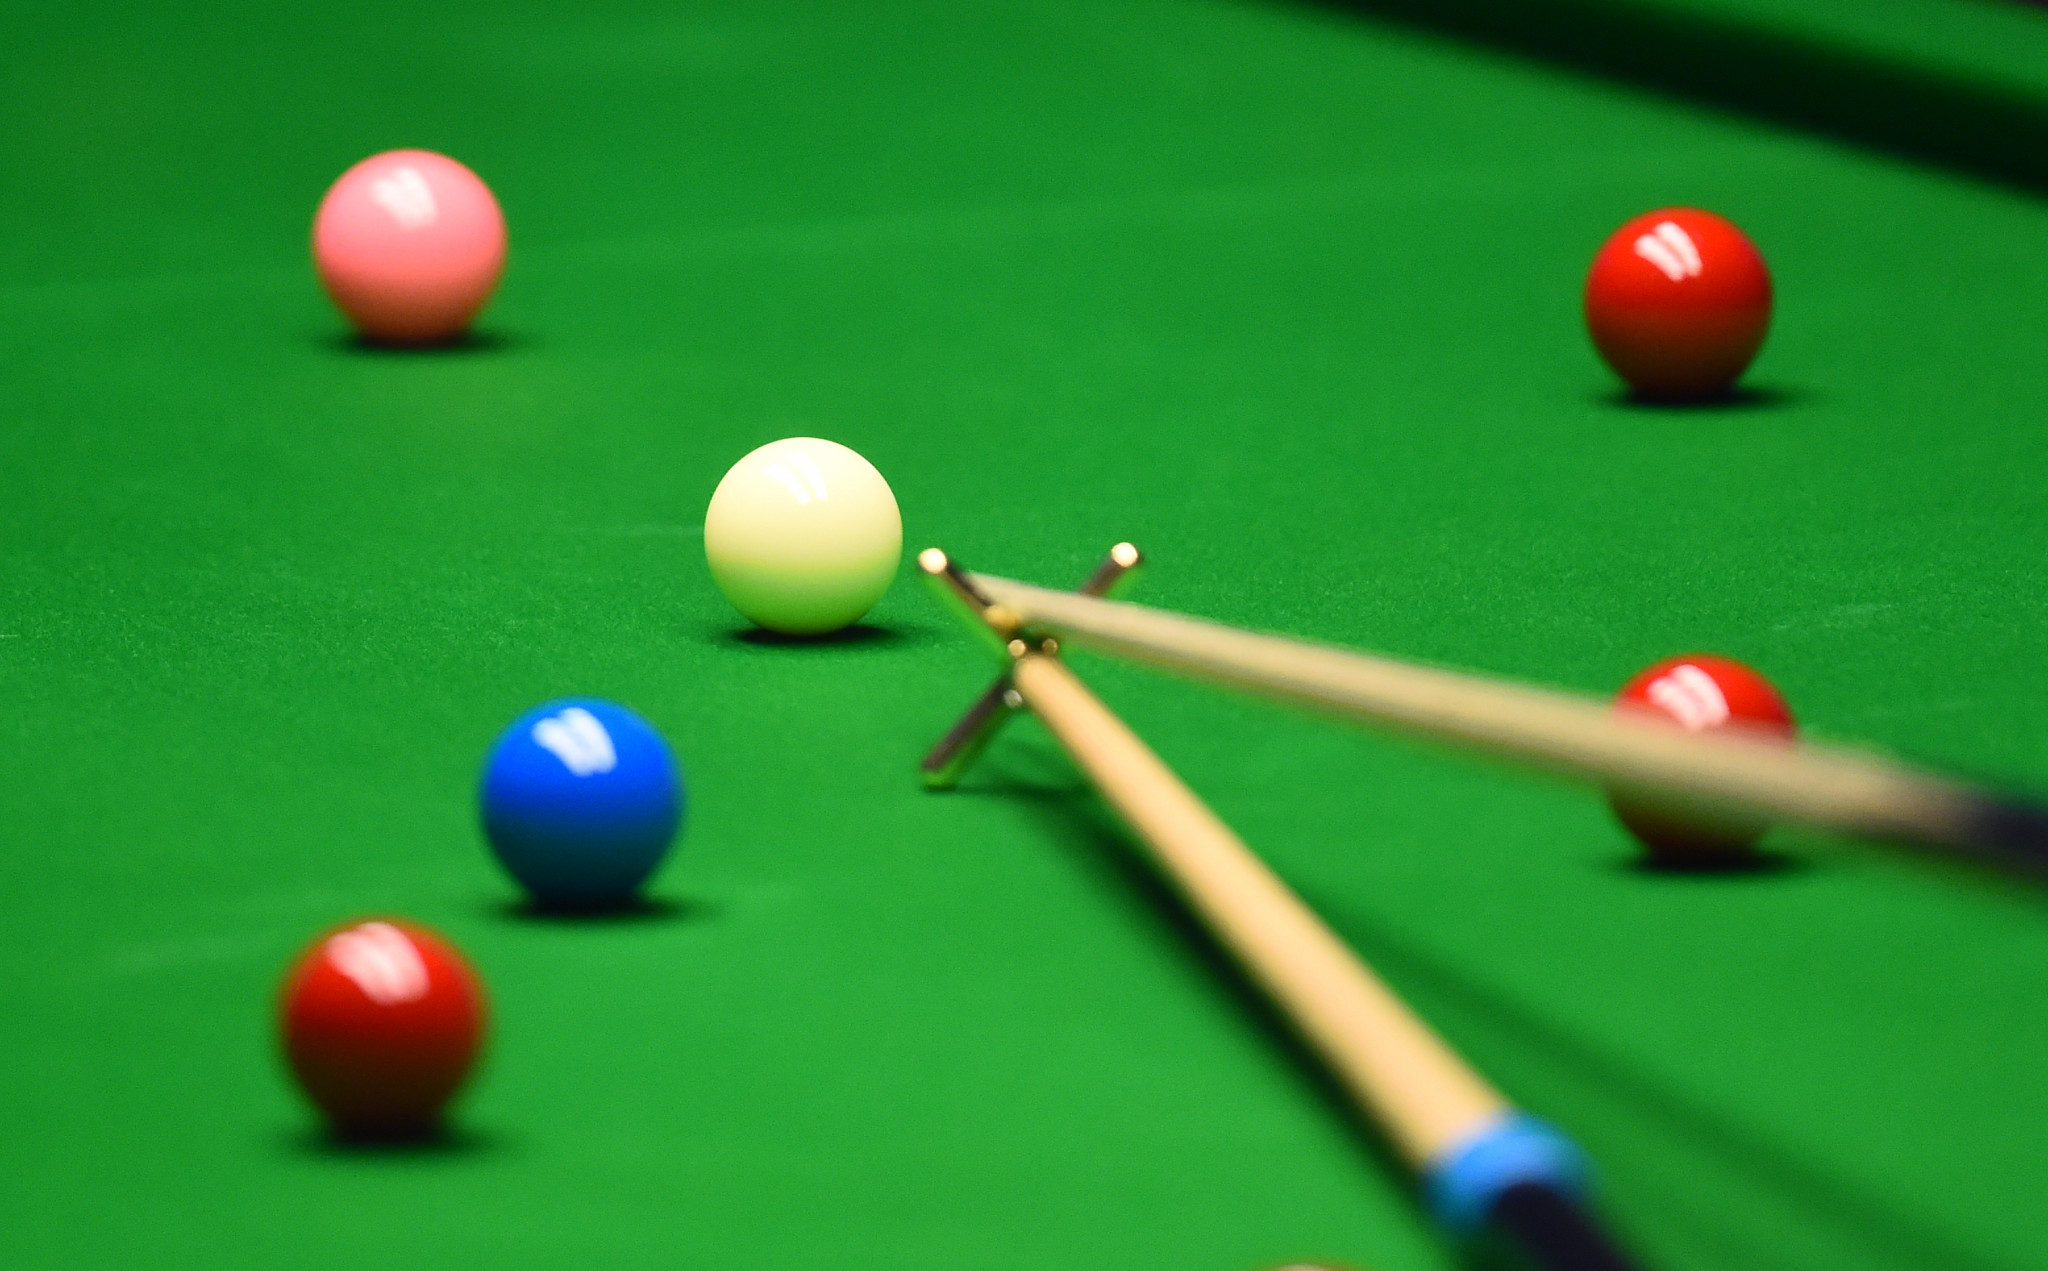 WPBSA say snooker clubs in England could open in July